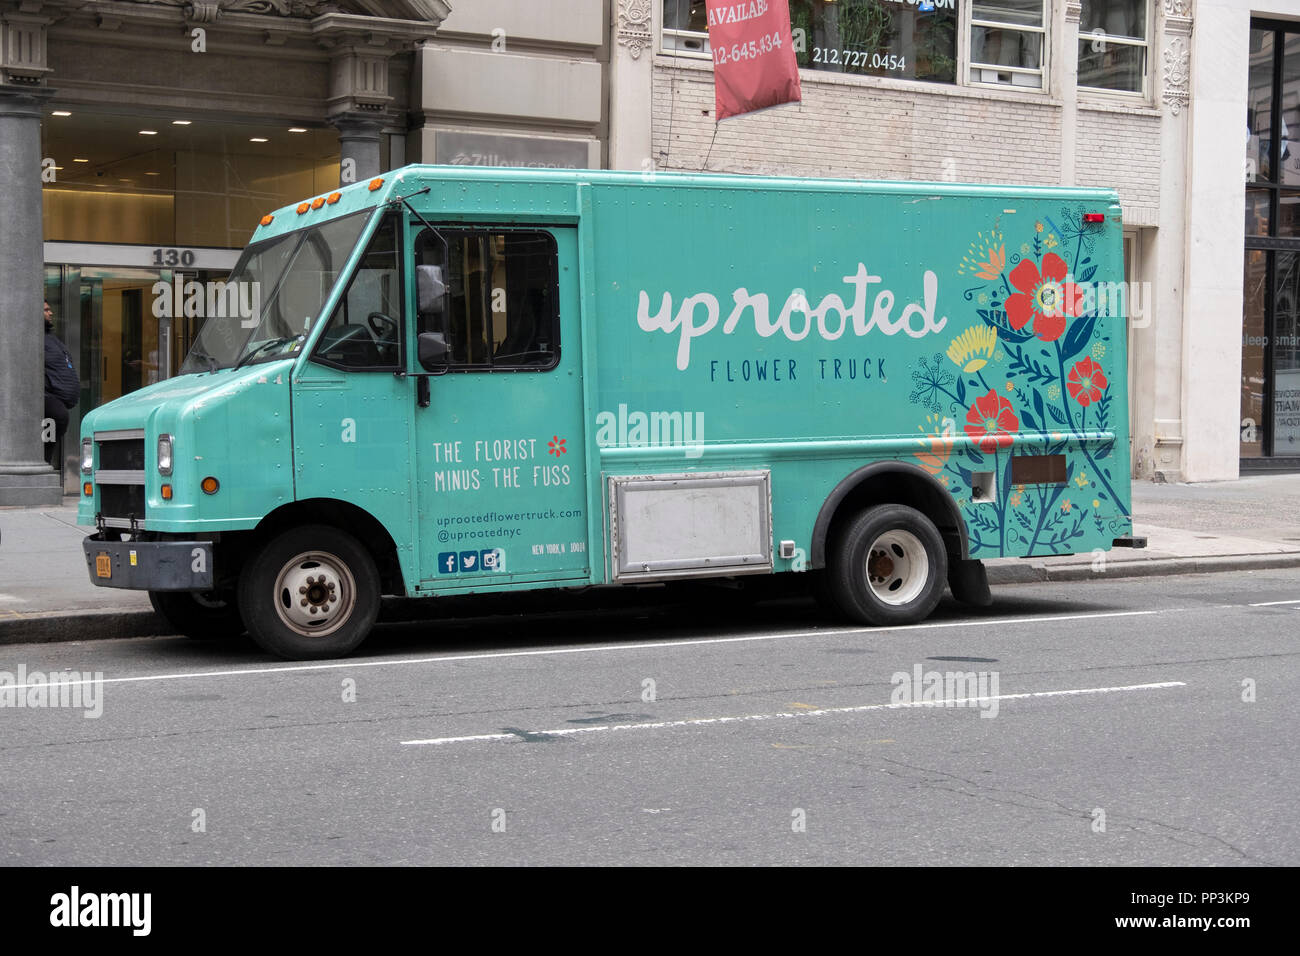 The Uprooted Flower Truck selling fresh flowers & bouquets out of a mobile store parked on Fifth Avenue in Lower Manhattan, New York City Stock Photo